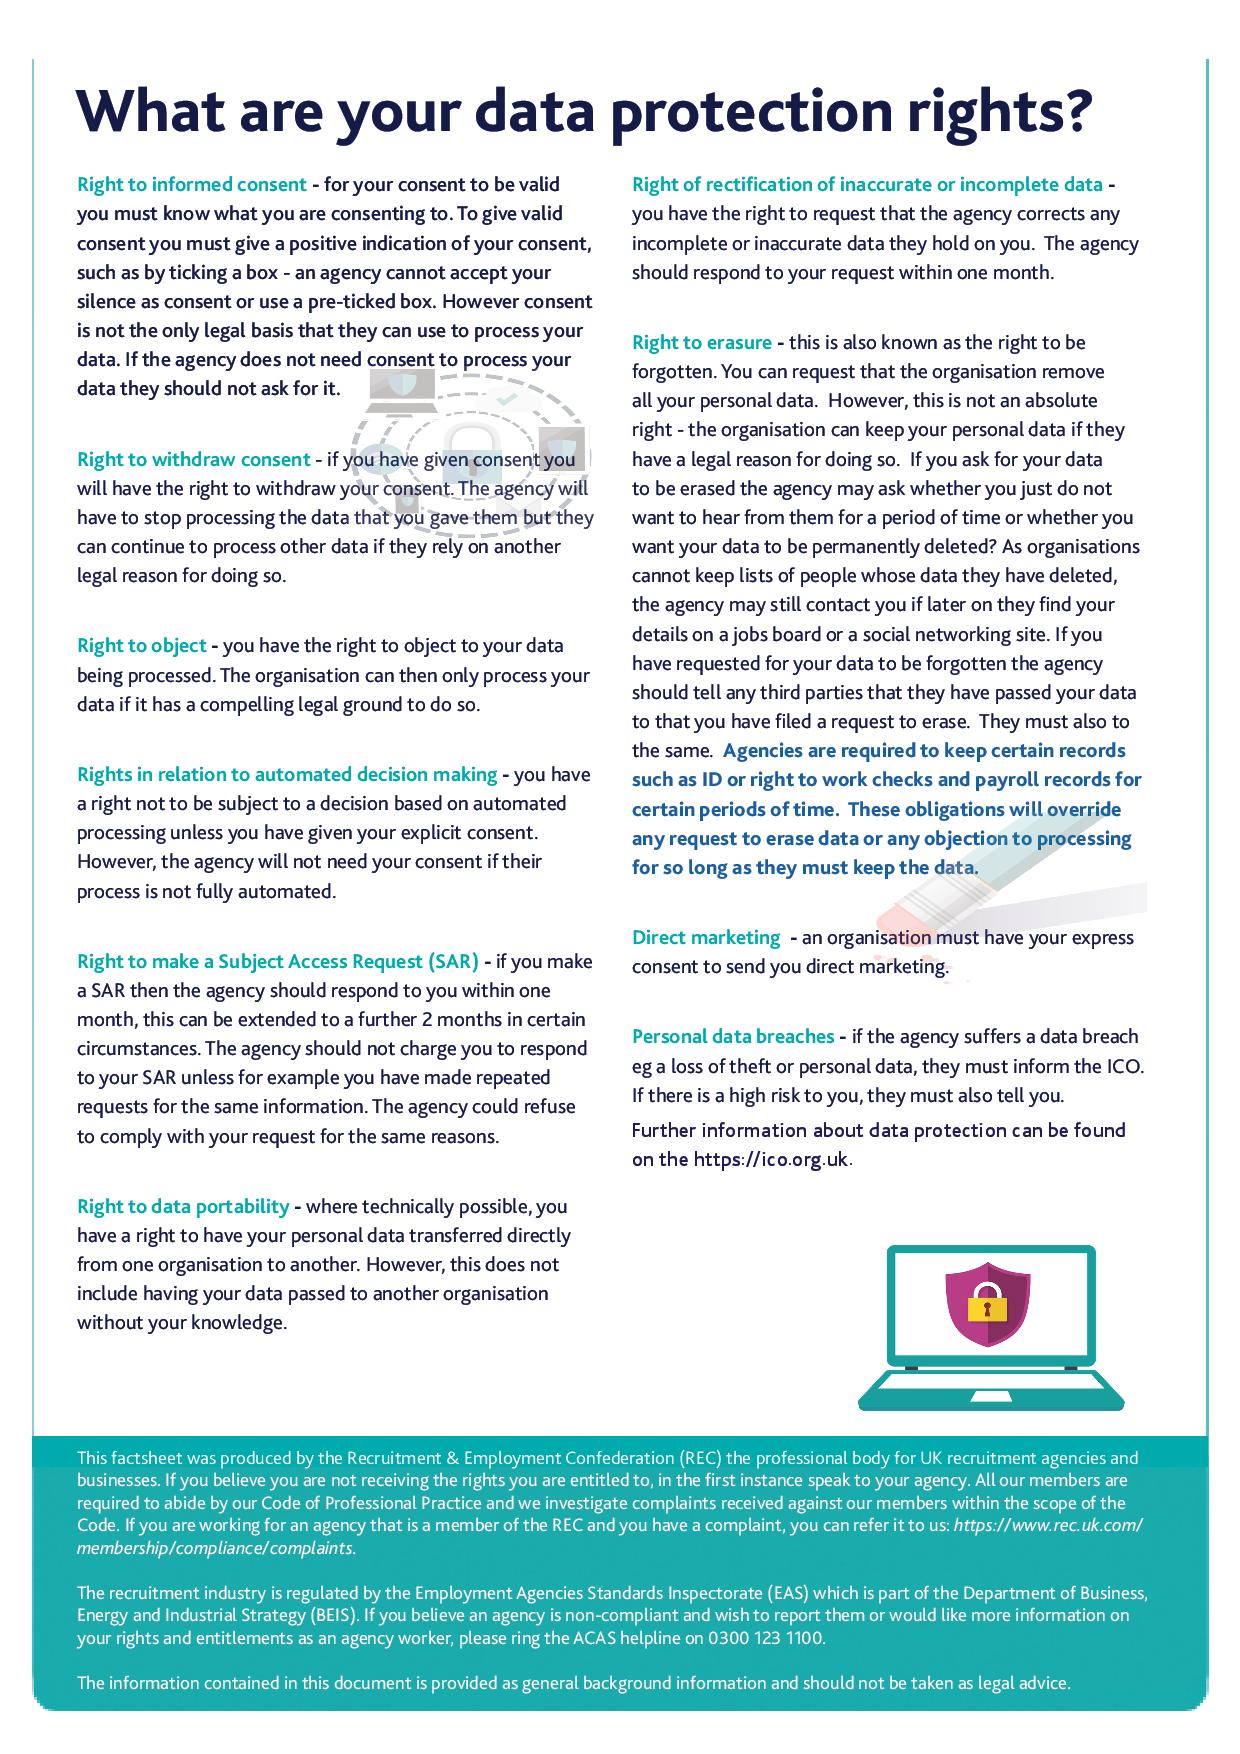 REC Know Your Data Protection Rights-page-002